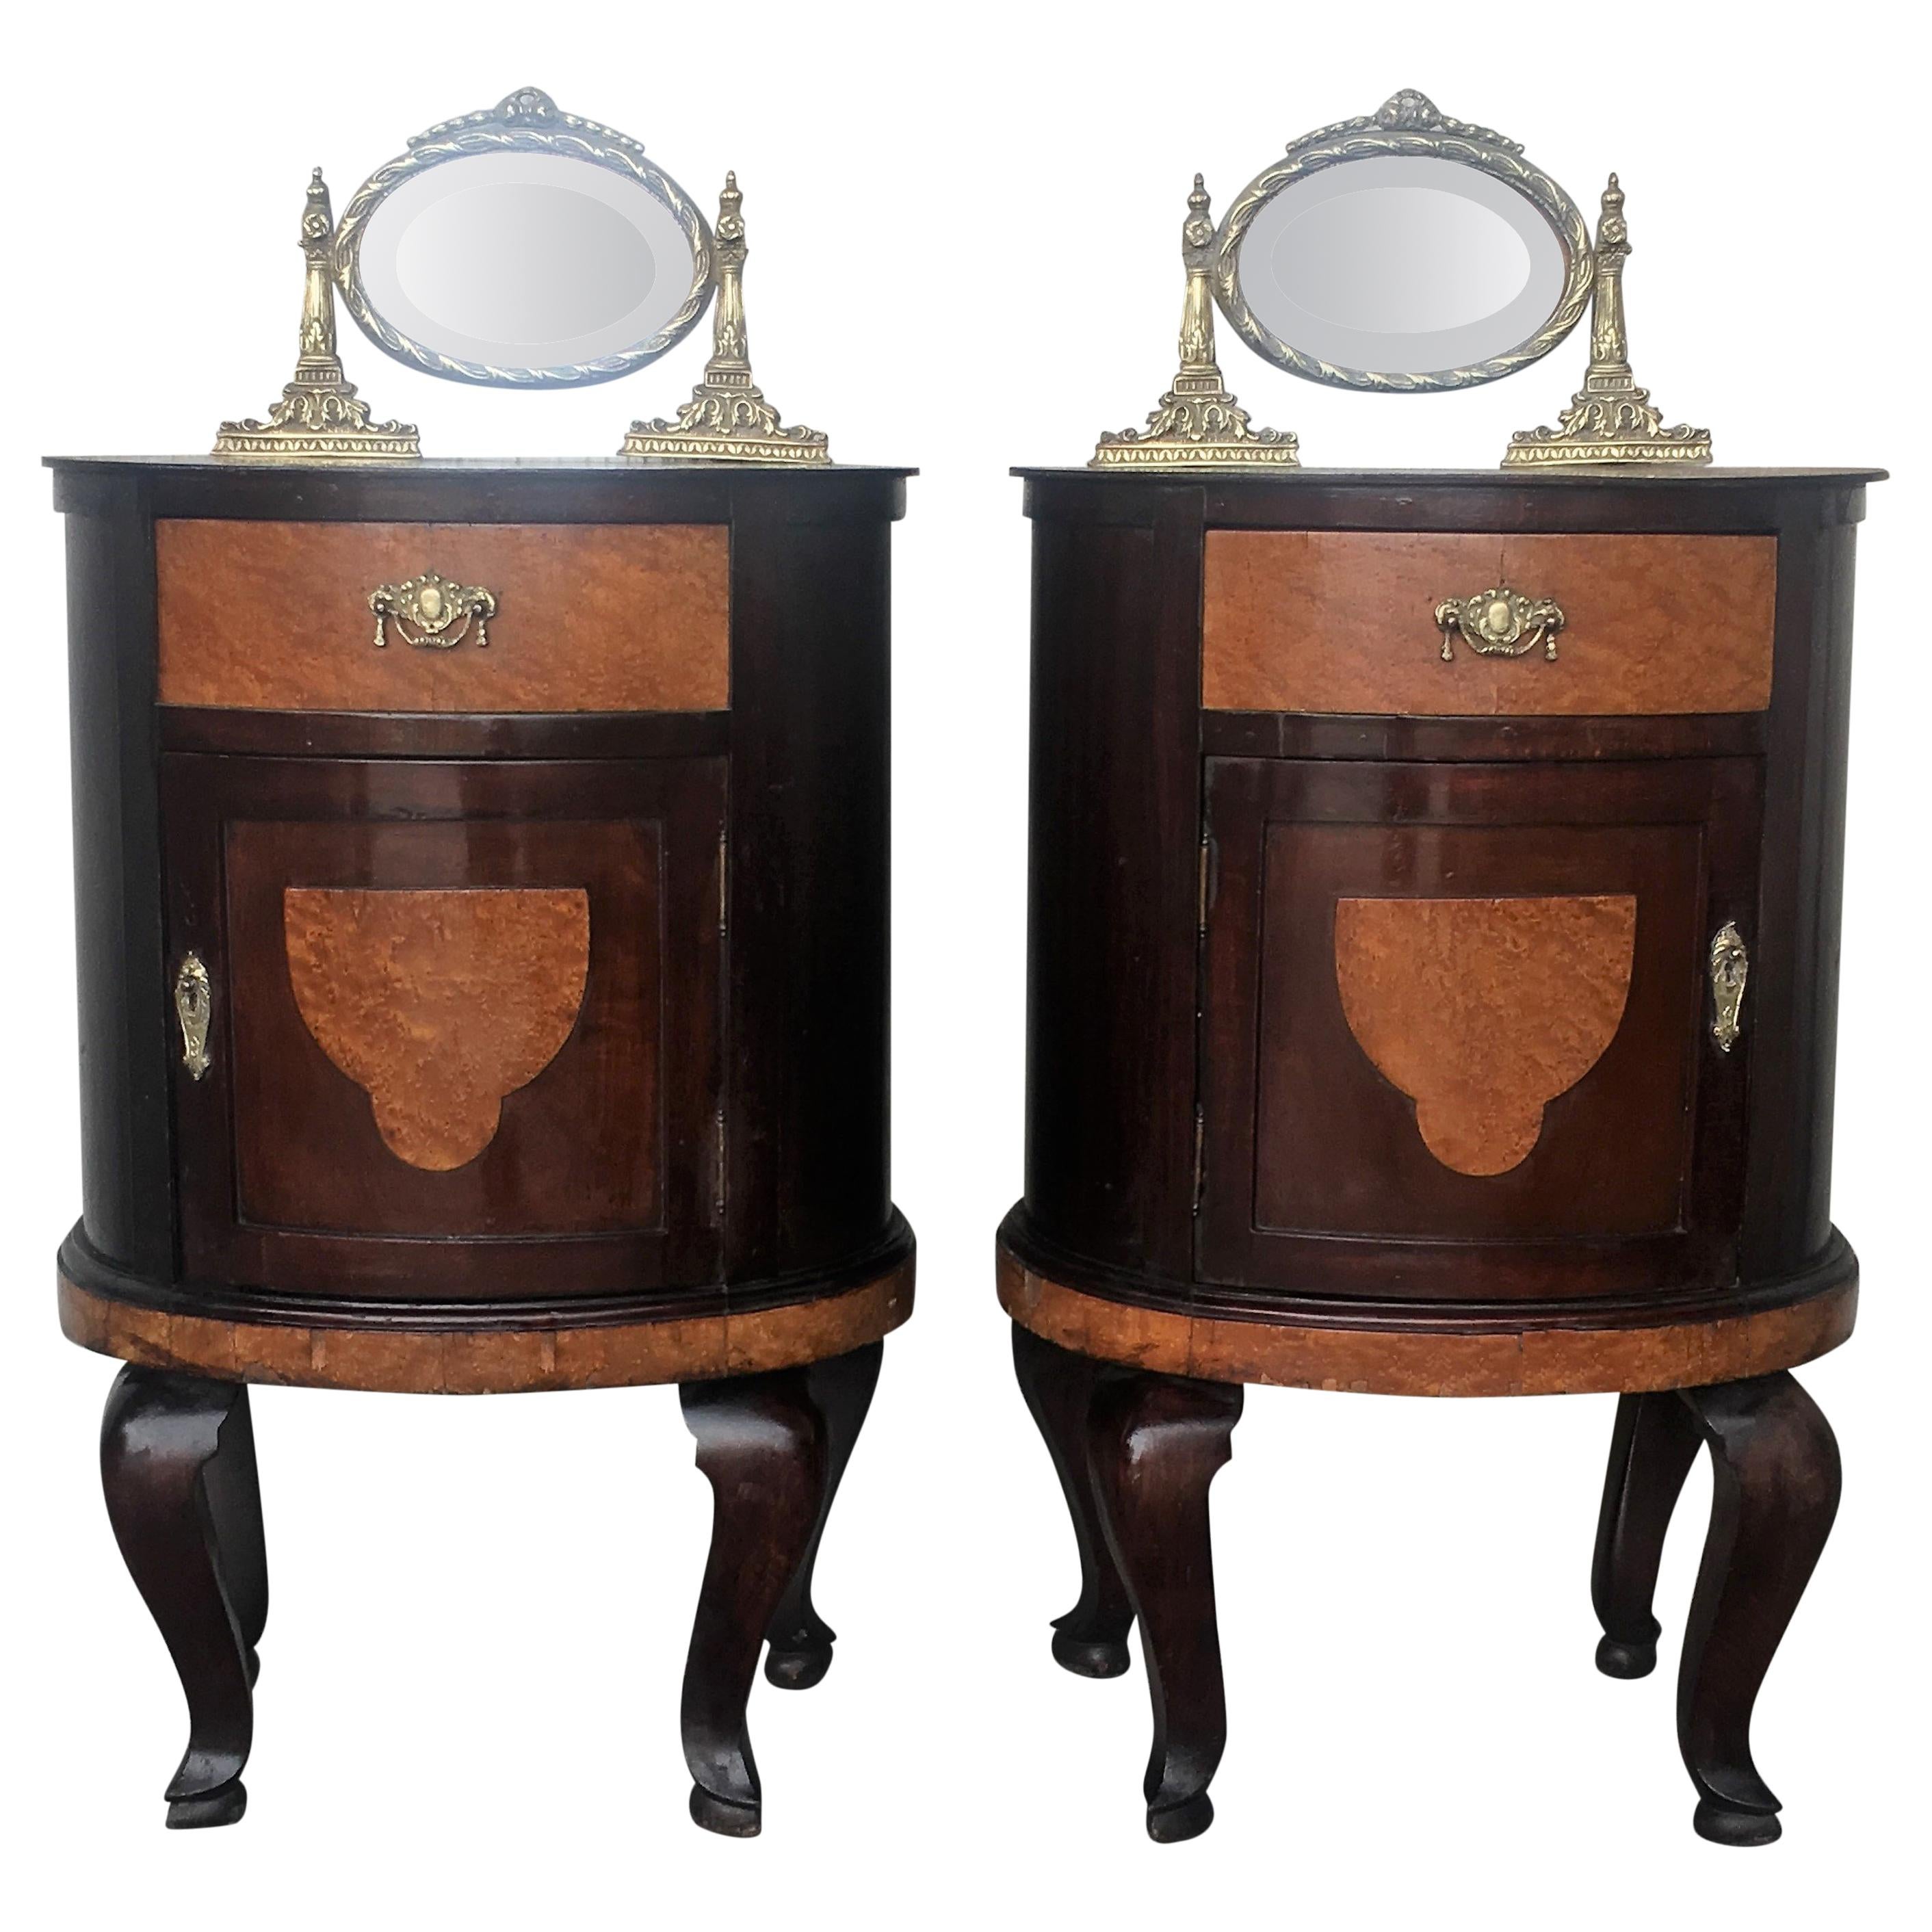 French Art Deco Style Marquetry Nightstands with Metal and Mirror Crest, Pair